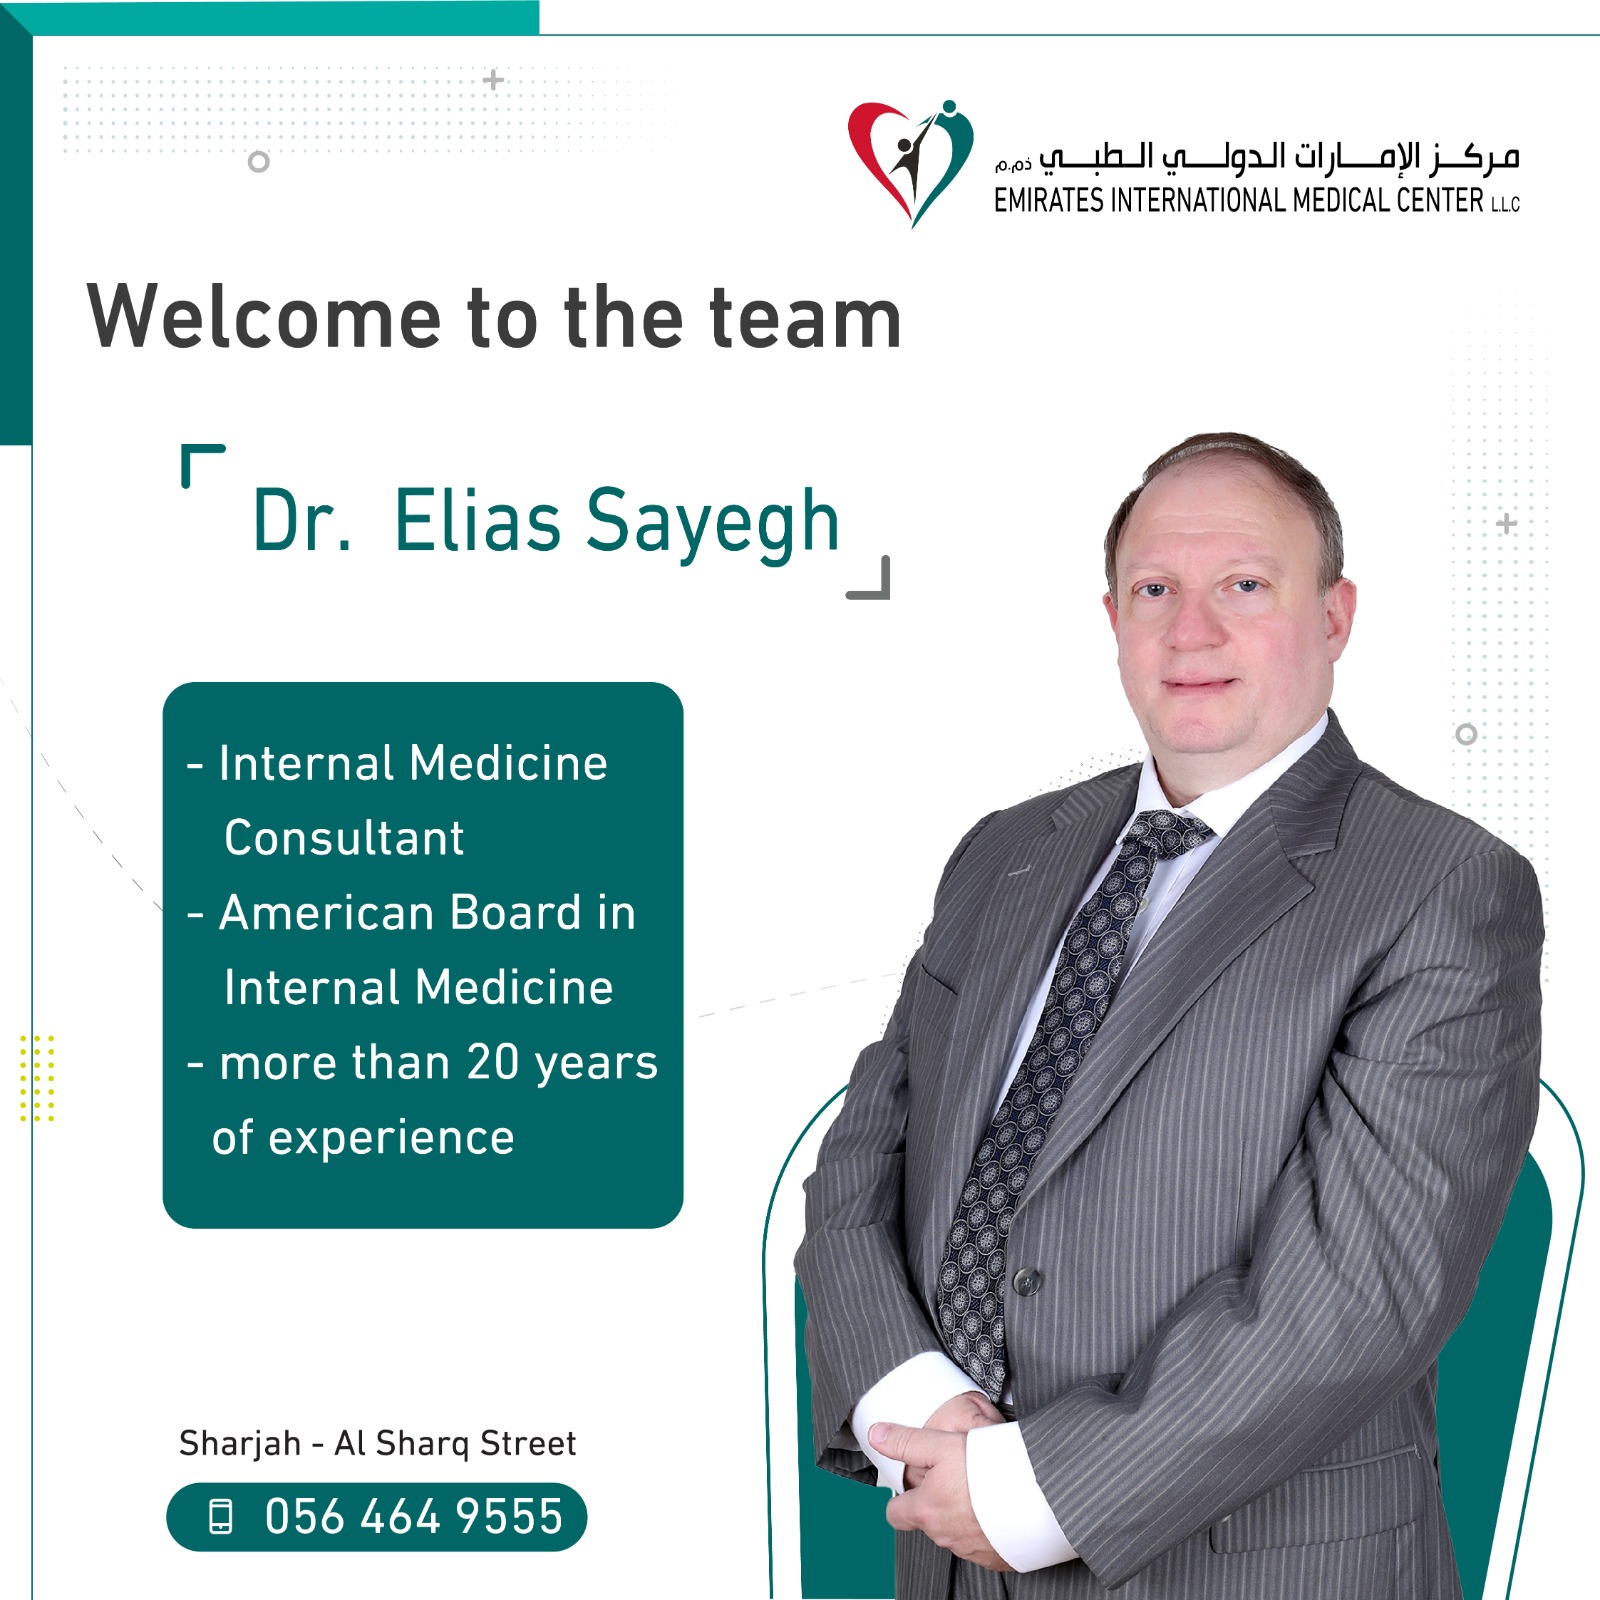 Joining of Dr. Elias Sayegh